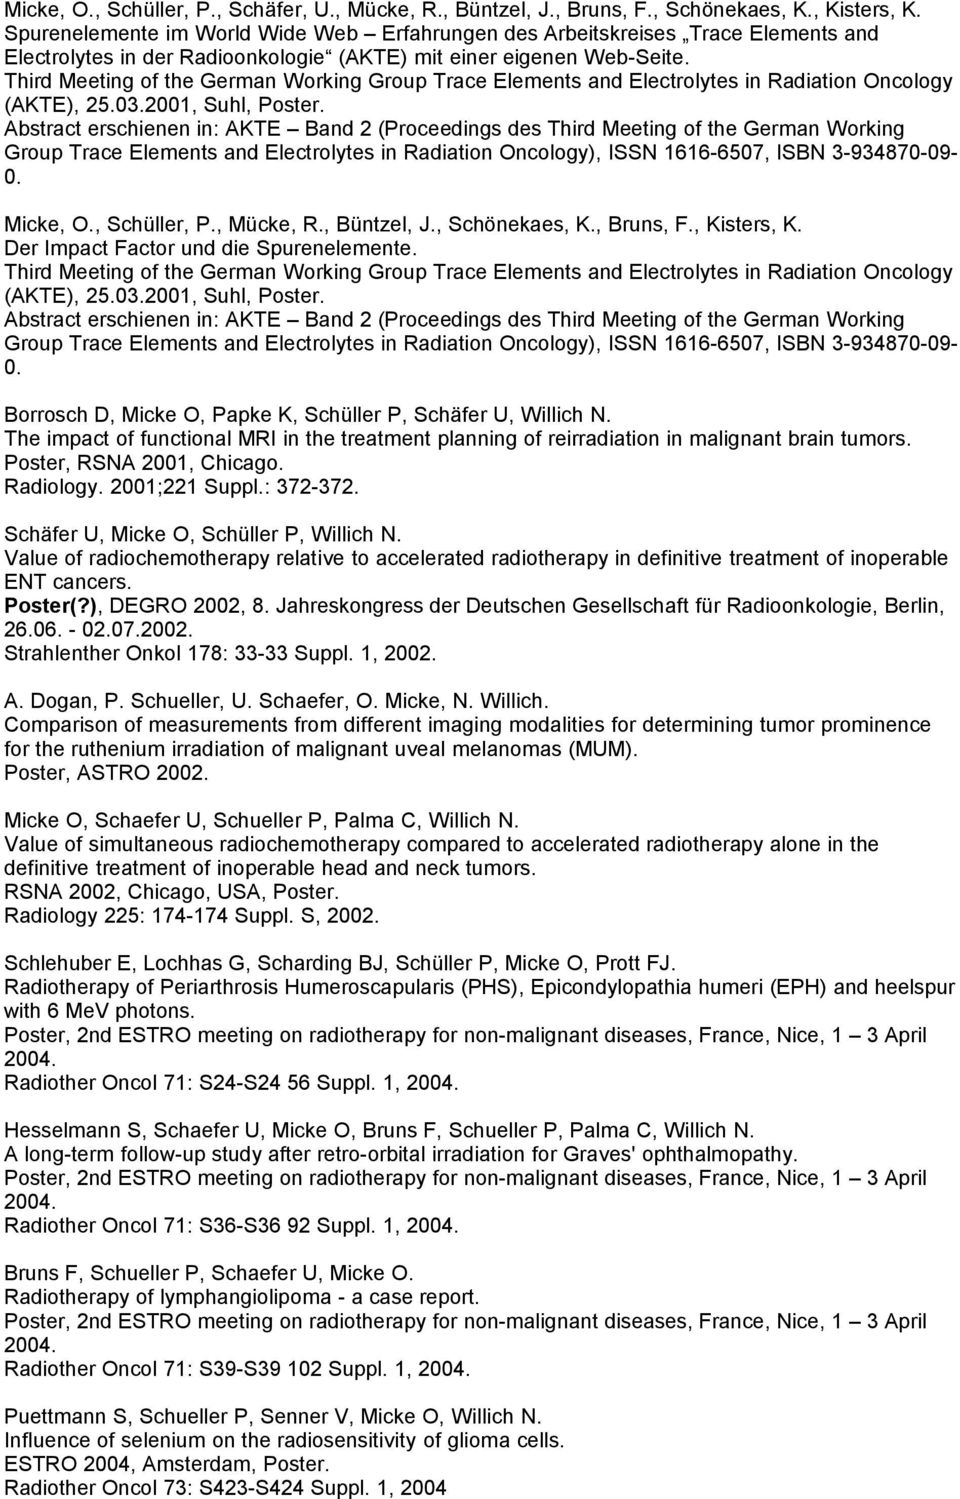 Third Meeting of the German Working Group Trace Elements and Electrolytes in Radiation Oncology (AKTE), 25.03.2001, Suhl, Poster.